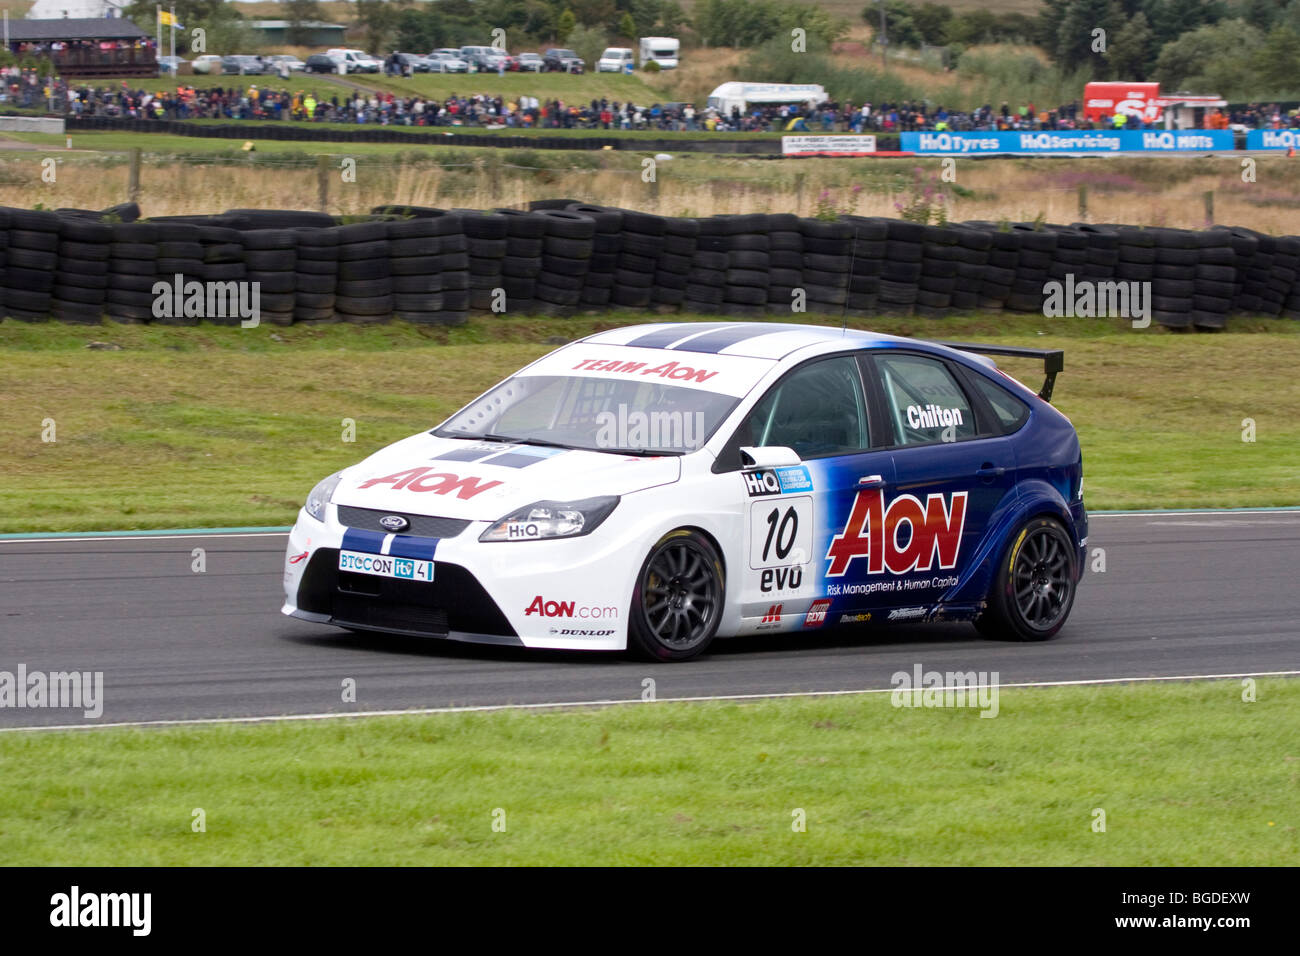 Tom Chilton driving for Team Aon during 2009 British Touring Car Championships race at Knockhill circuit, Fife, Scotland Stock Photo